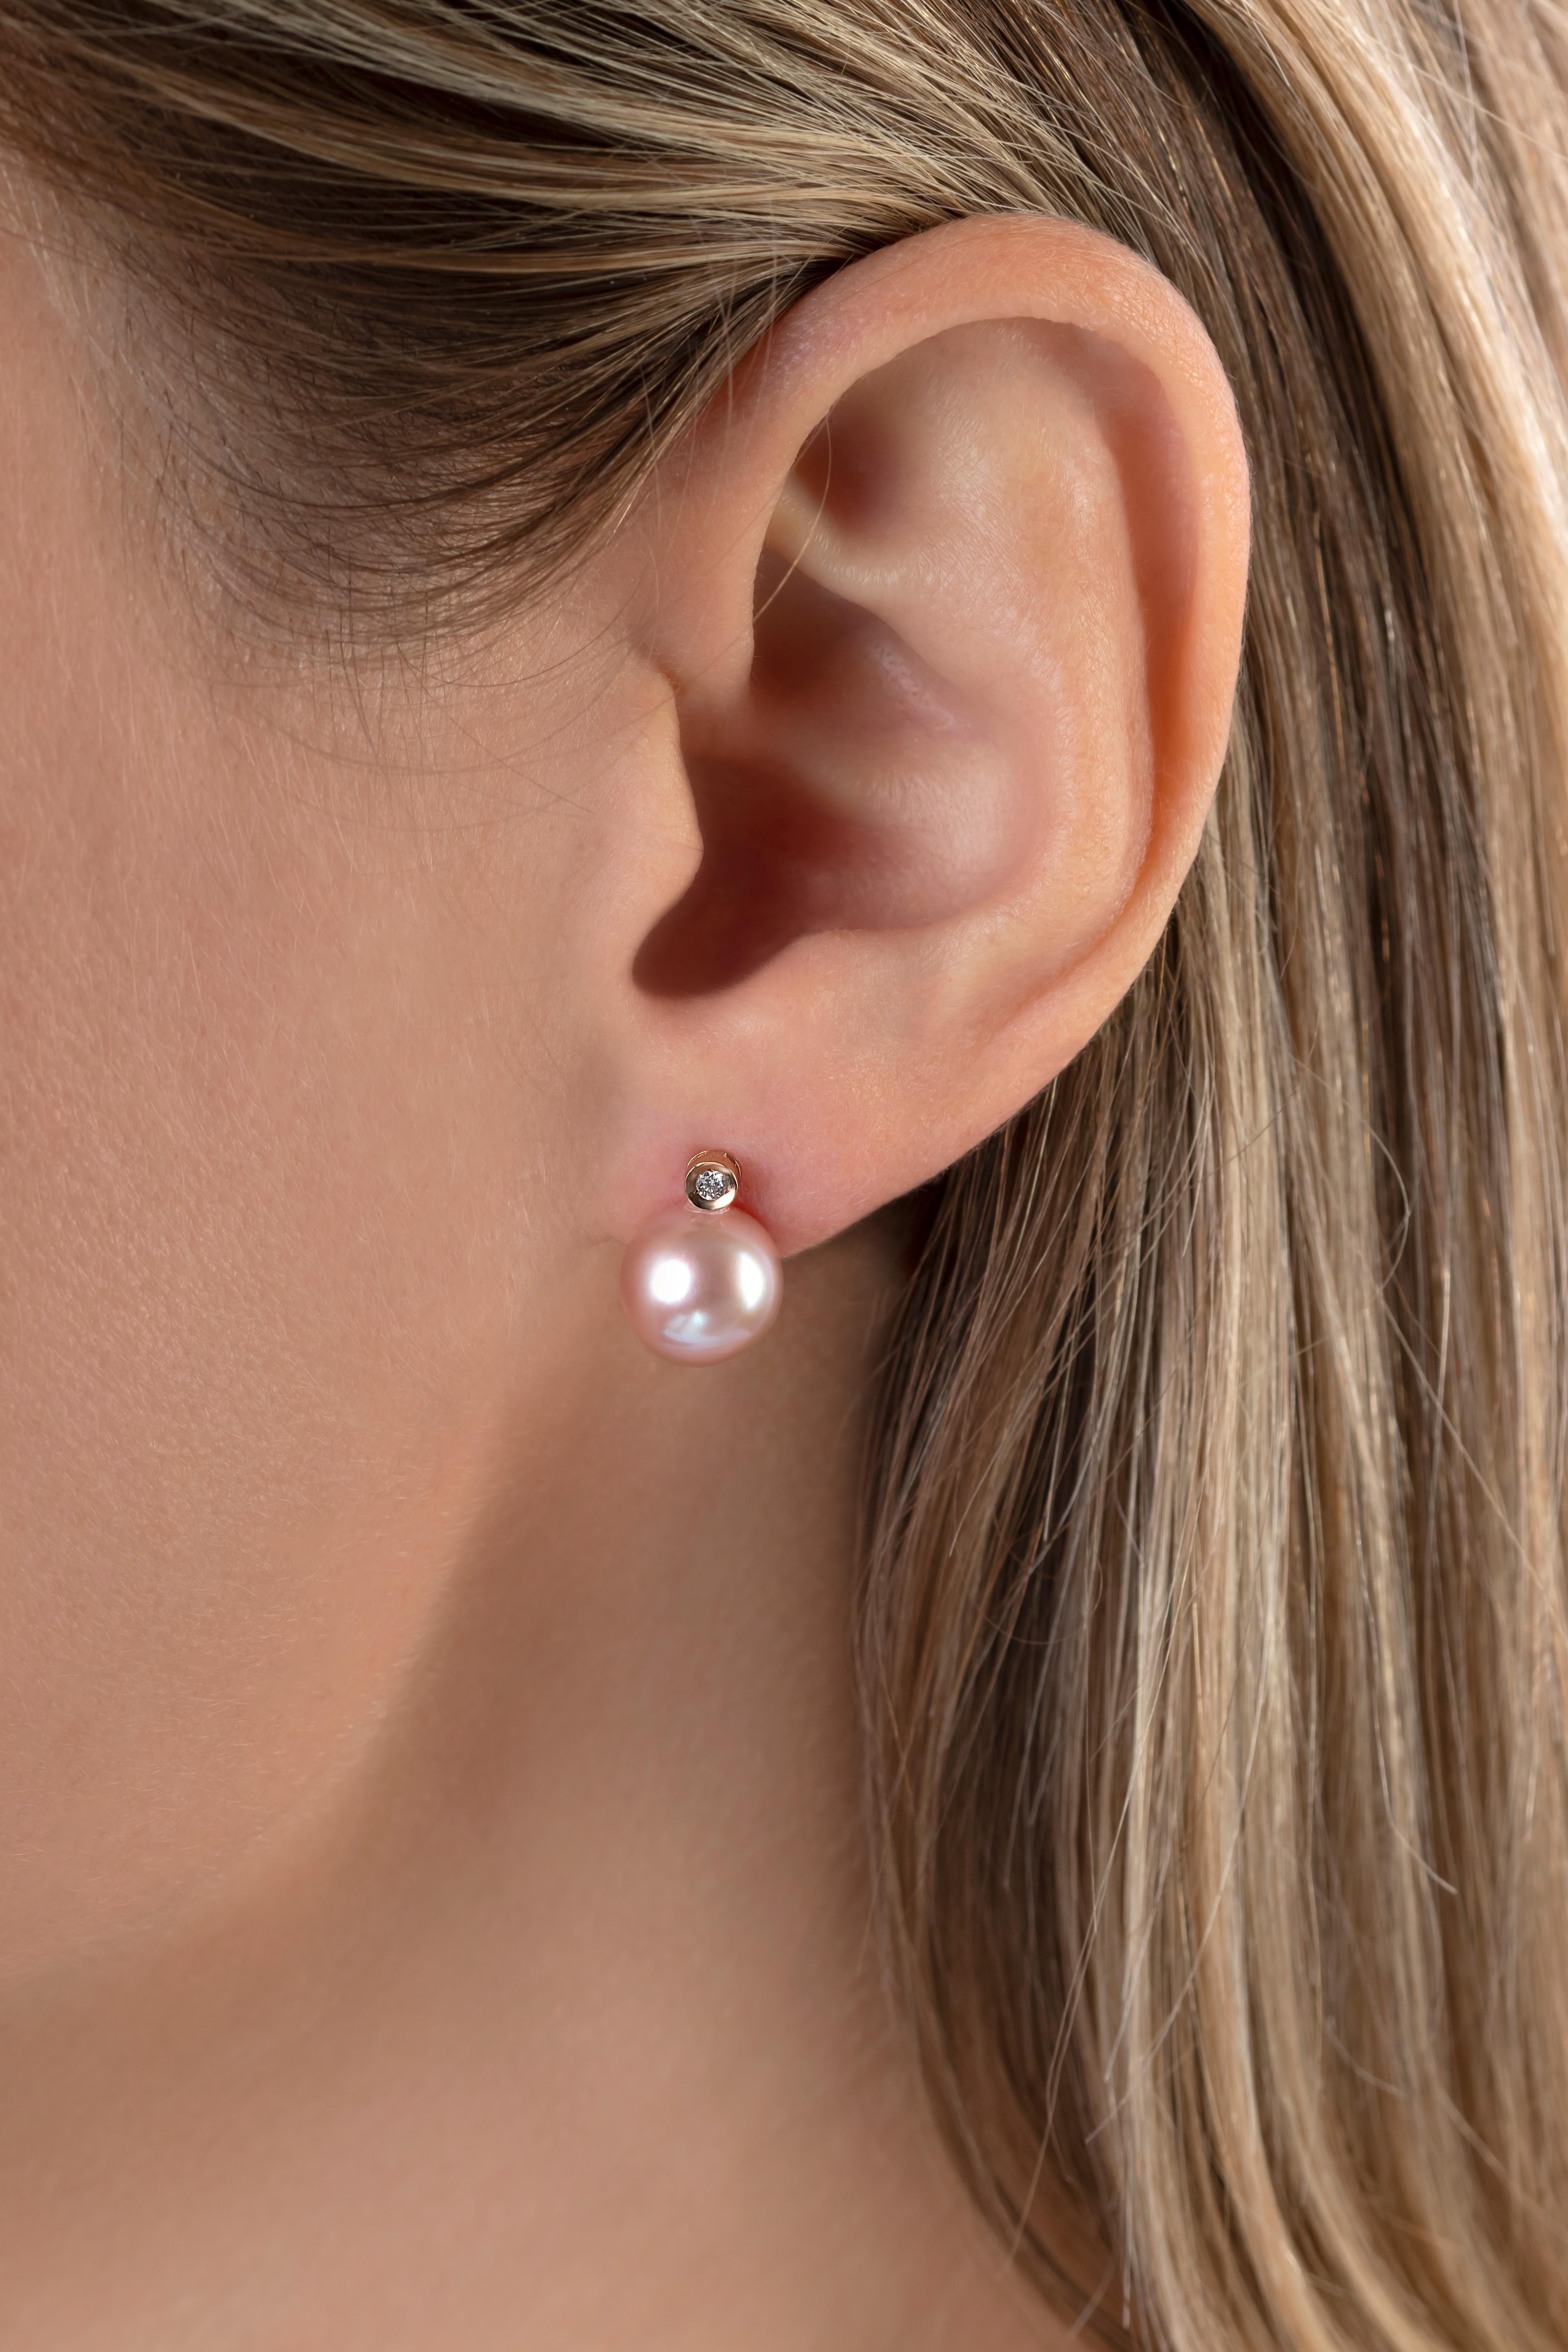 These delicate earrings by Yoko London feature sumptuous, natural colour pink Freshwater pearls set beneath a solitaire diamond. Timeless and elegant, these elegant earrings are the perfect accessory for both daytime and evening looks. 
-	9.5-10mm